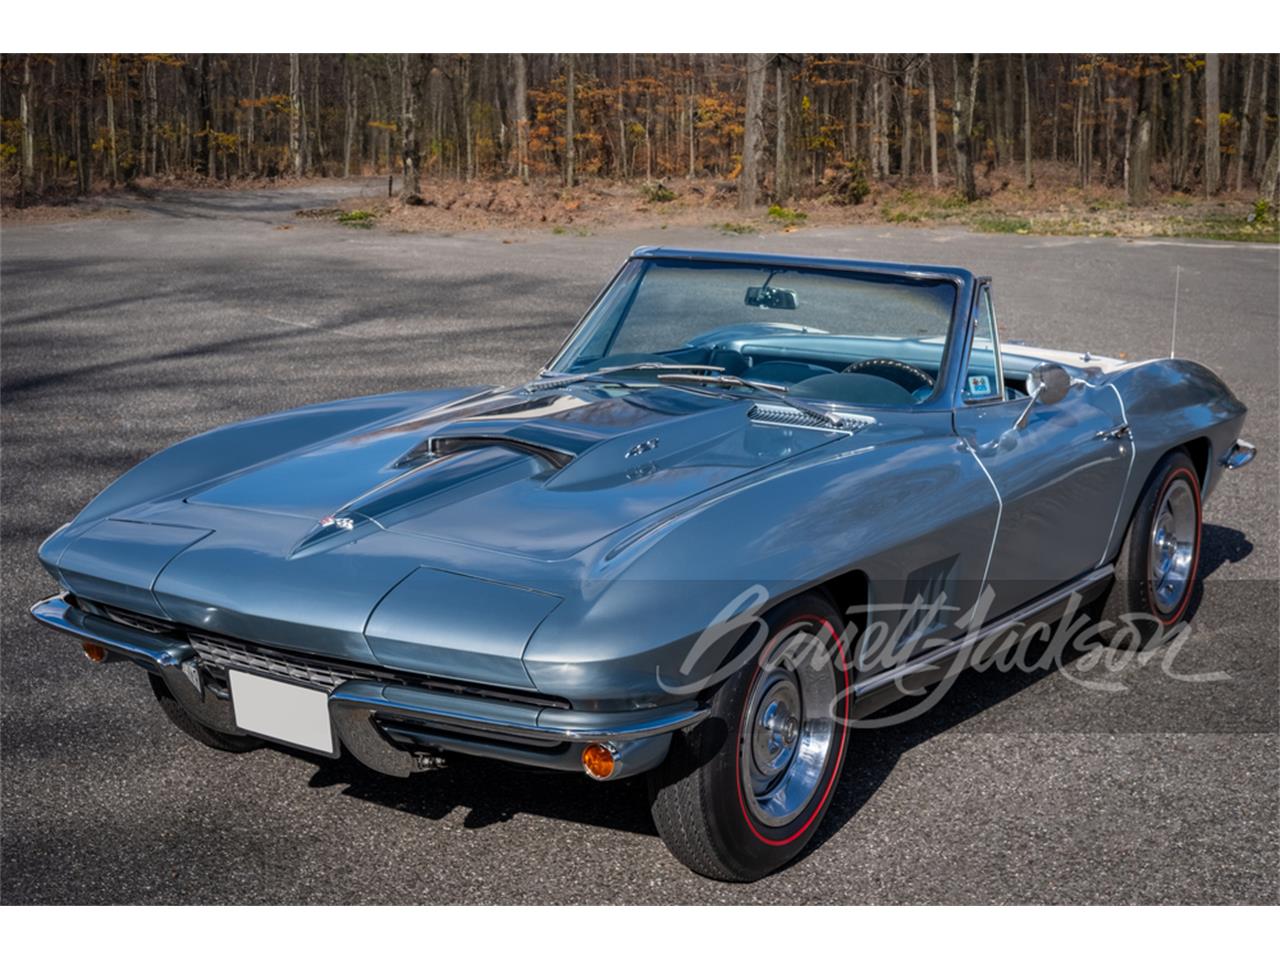 For Sale at Auction: 1967 Chevrolet Corvette in Scottsdale, Arizona for sale in Scottsdale, AZ